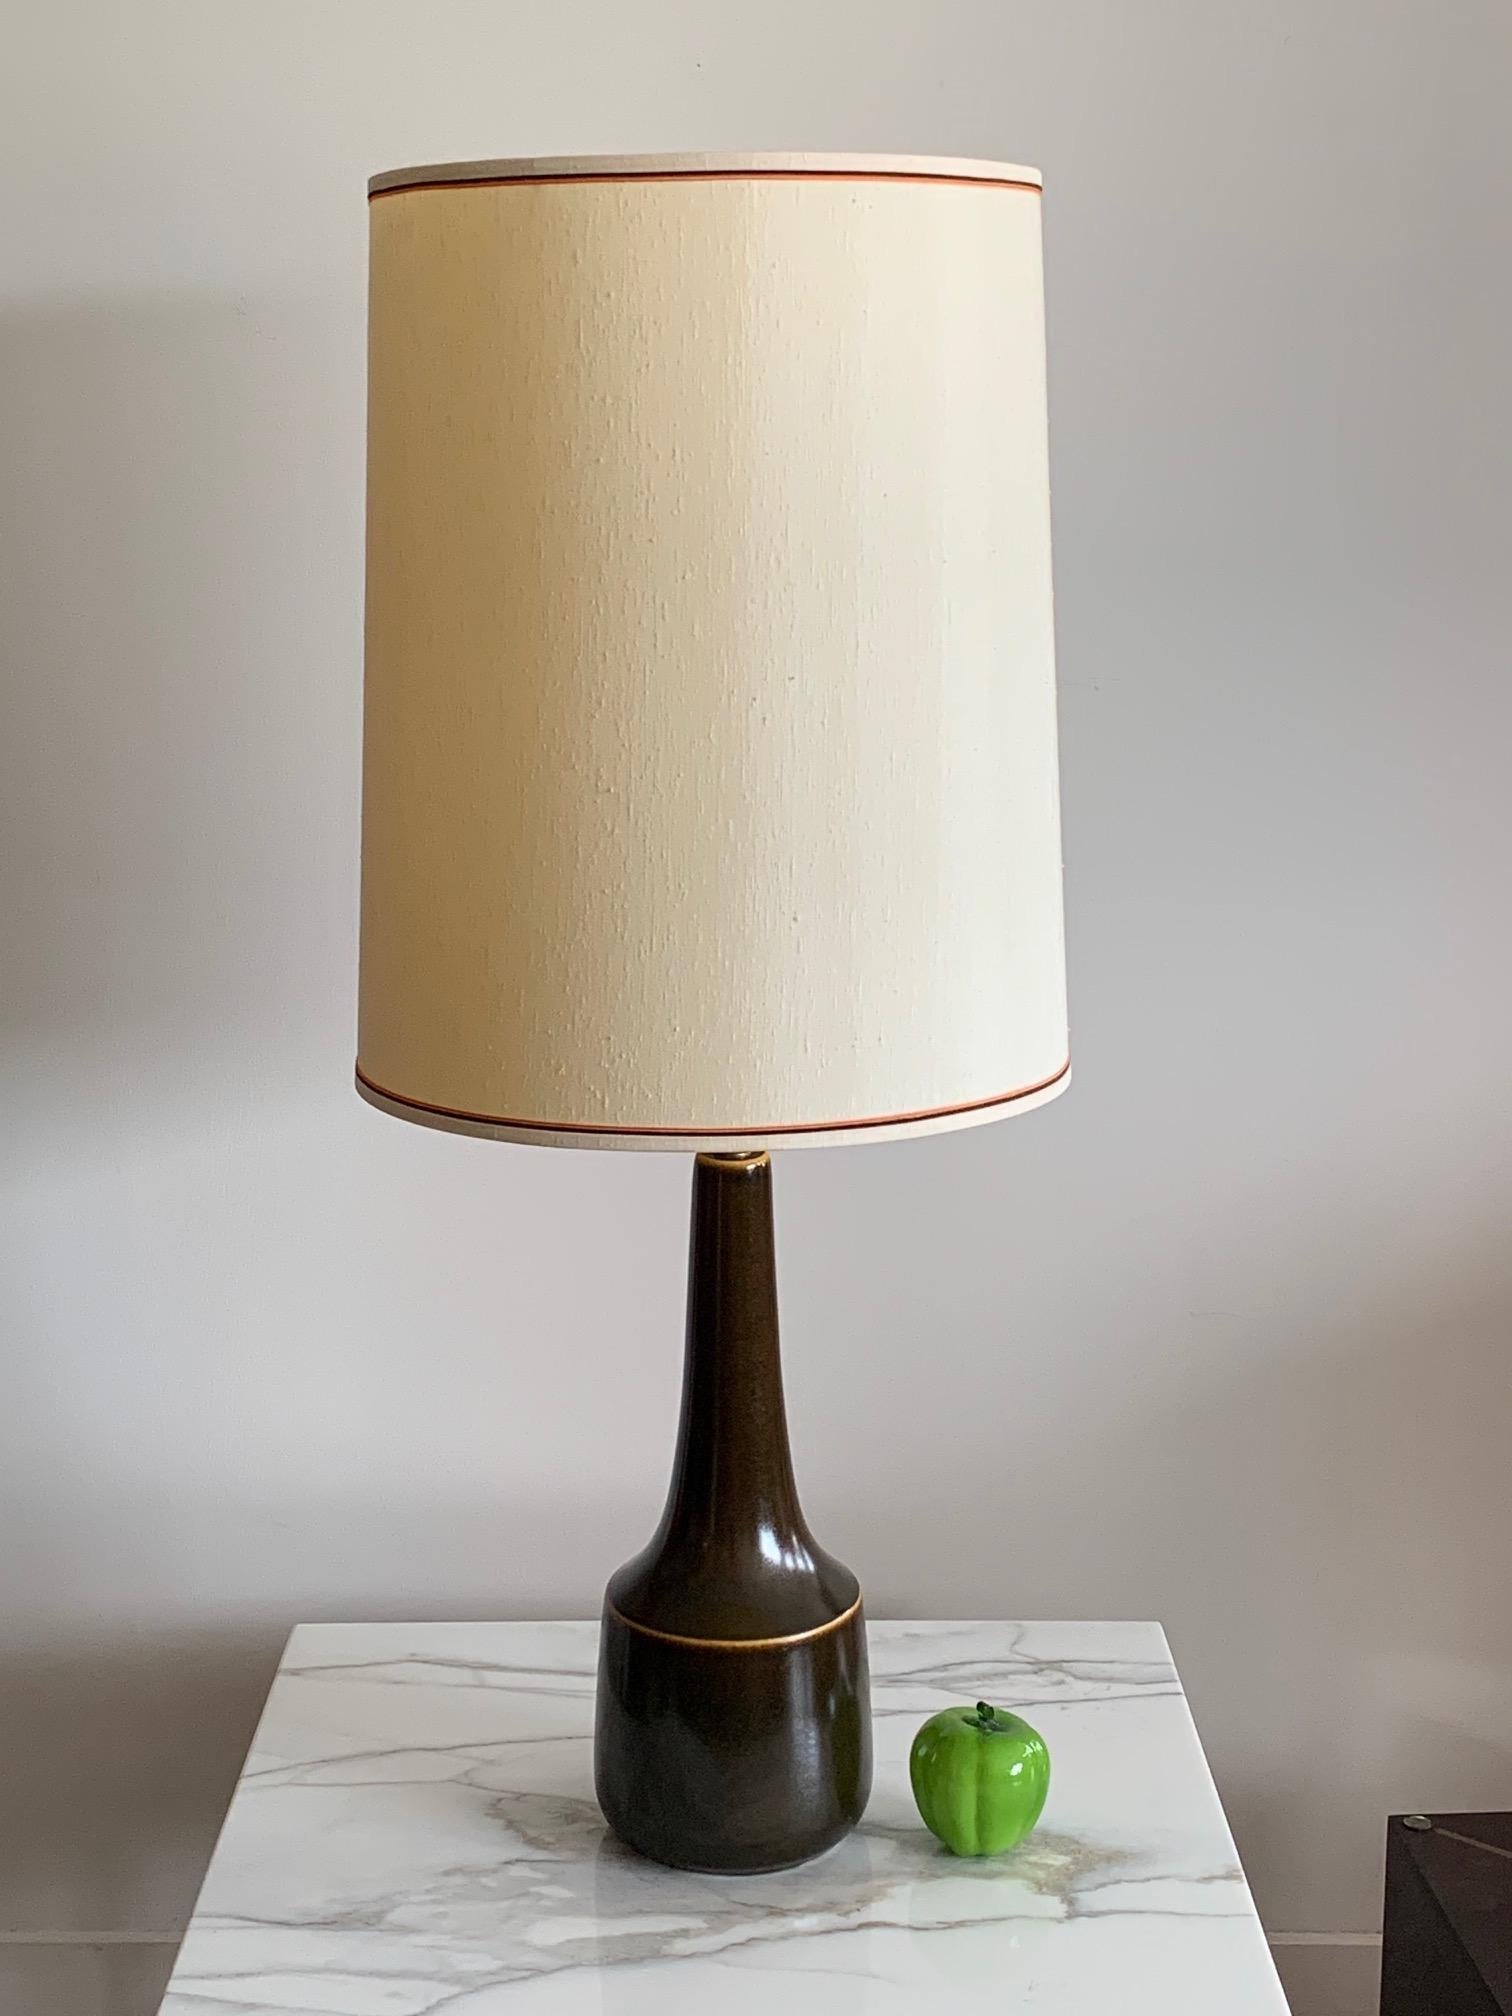 A beautiful ceramic lamp by Lotte & Gunnar Bostlund, made in Canada, circa early 1960s. Beautiful glaze varying from dark brown to light brown/yellow on the edges.